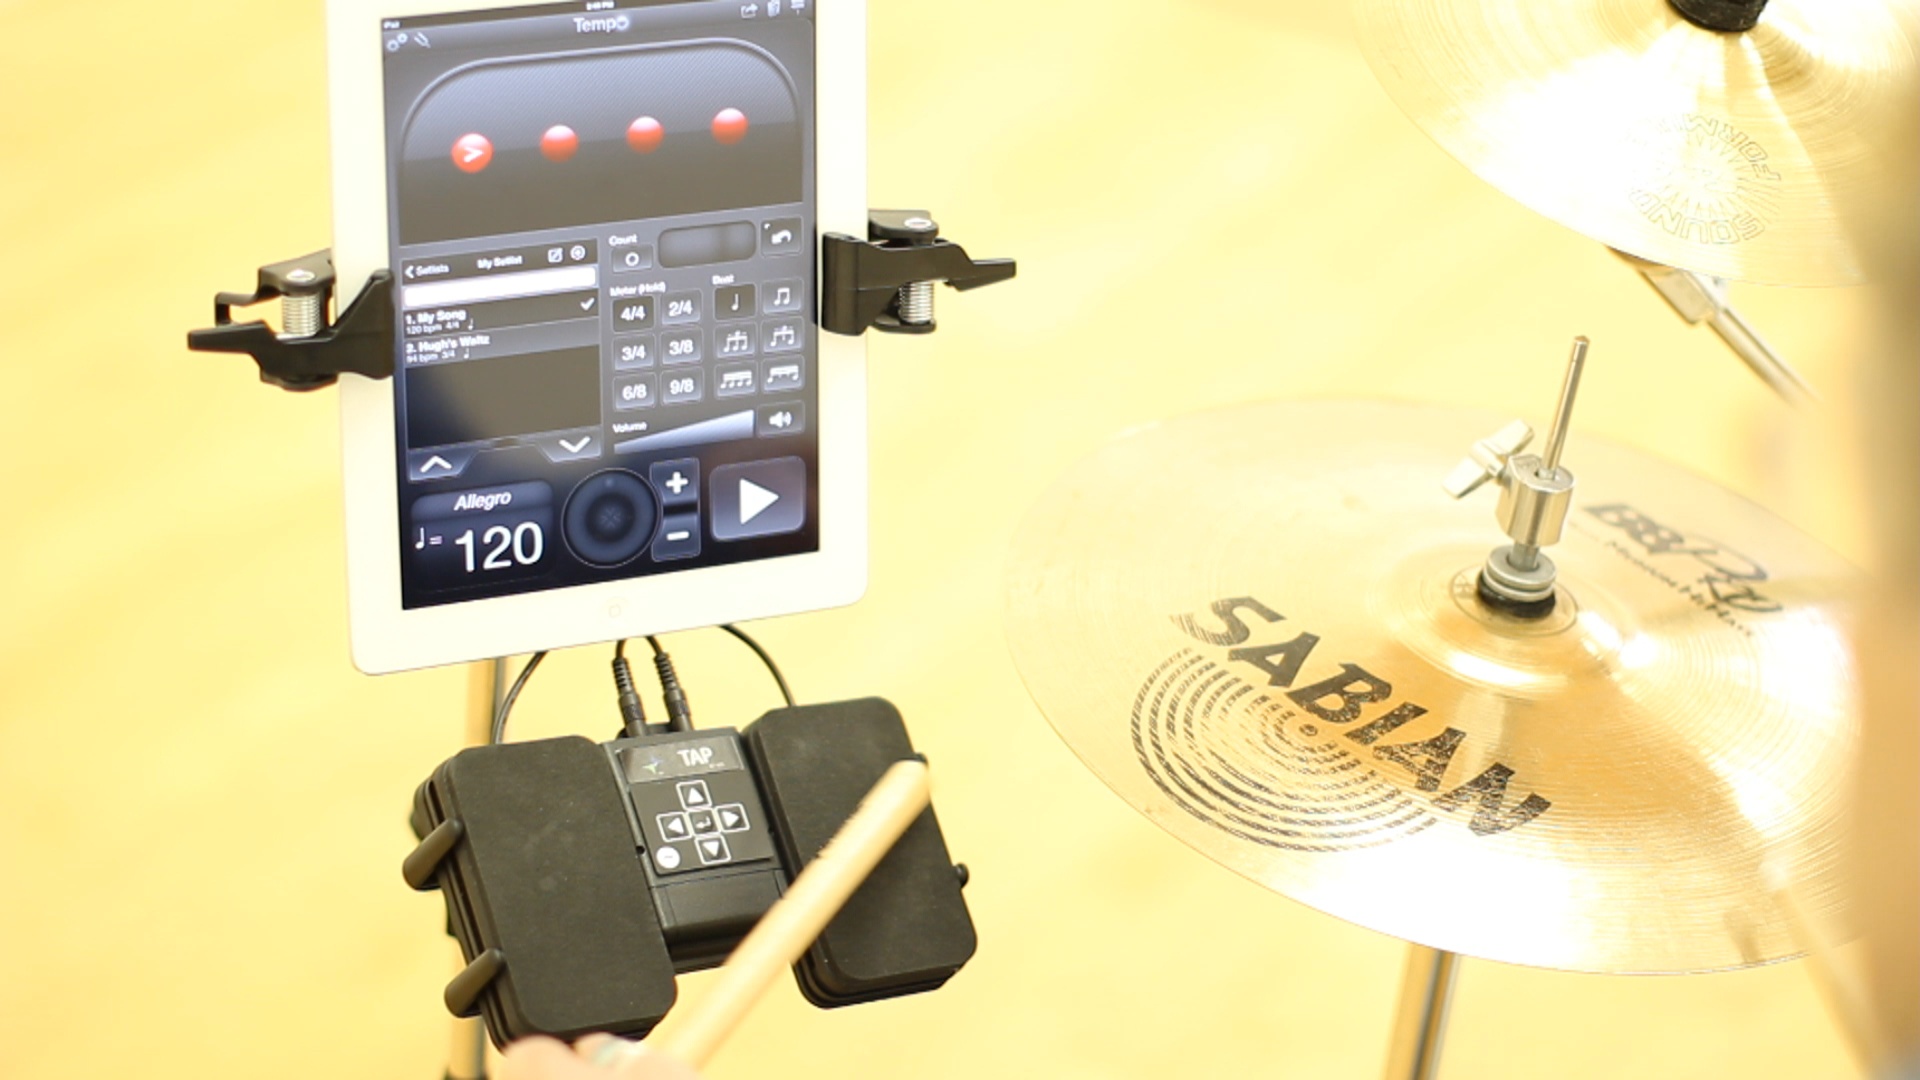 Trigger metronome apps with the AirTurn TAP